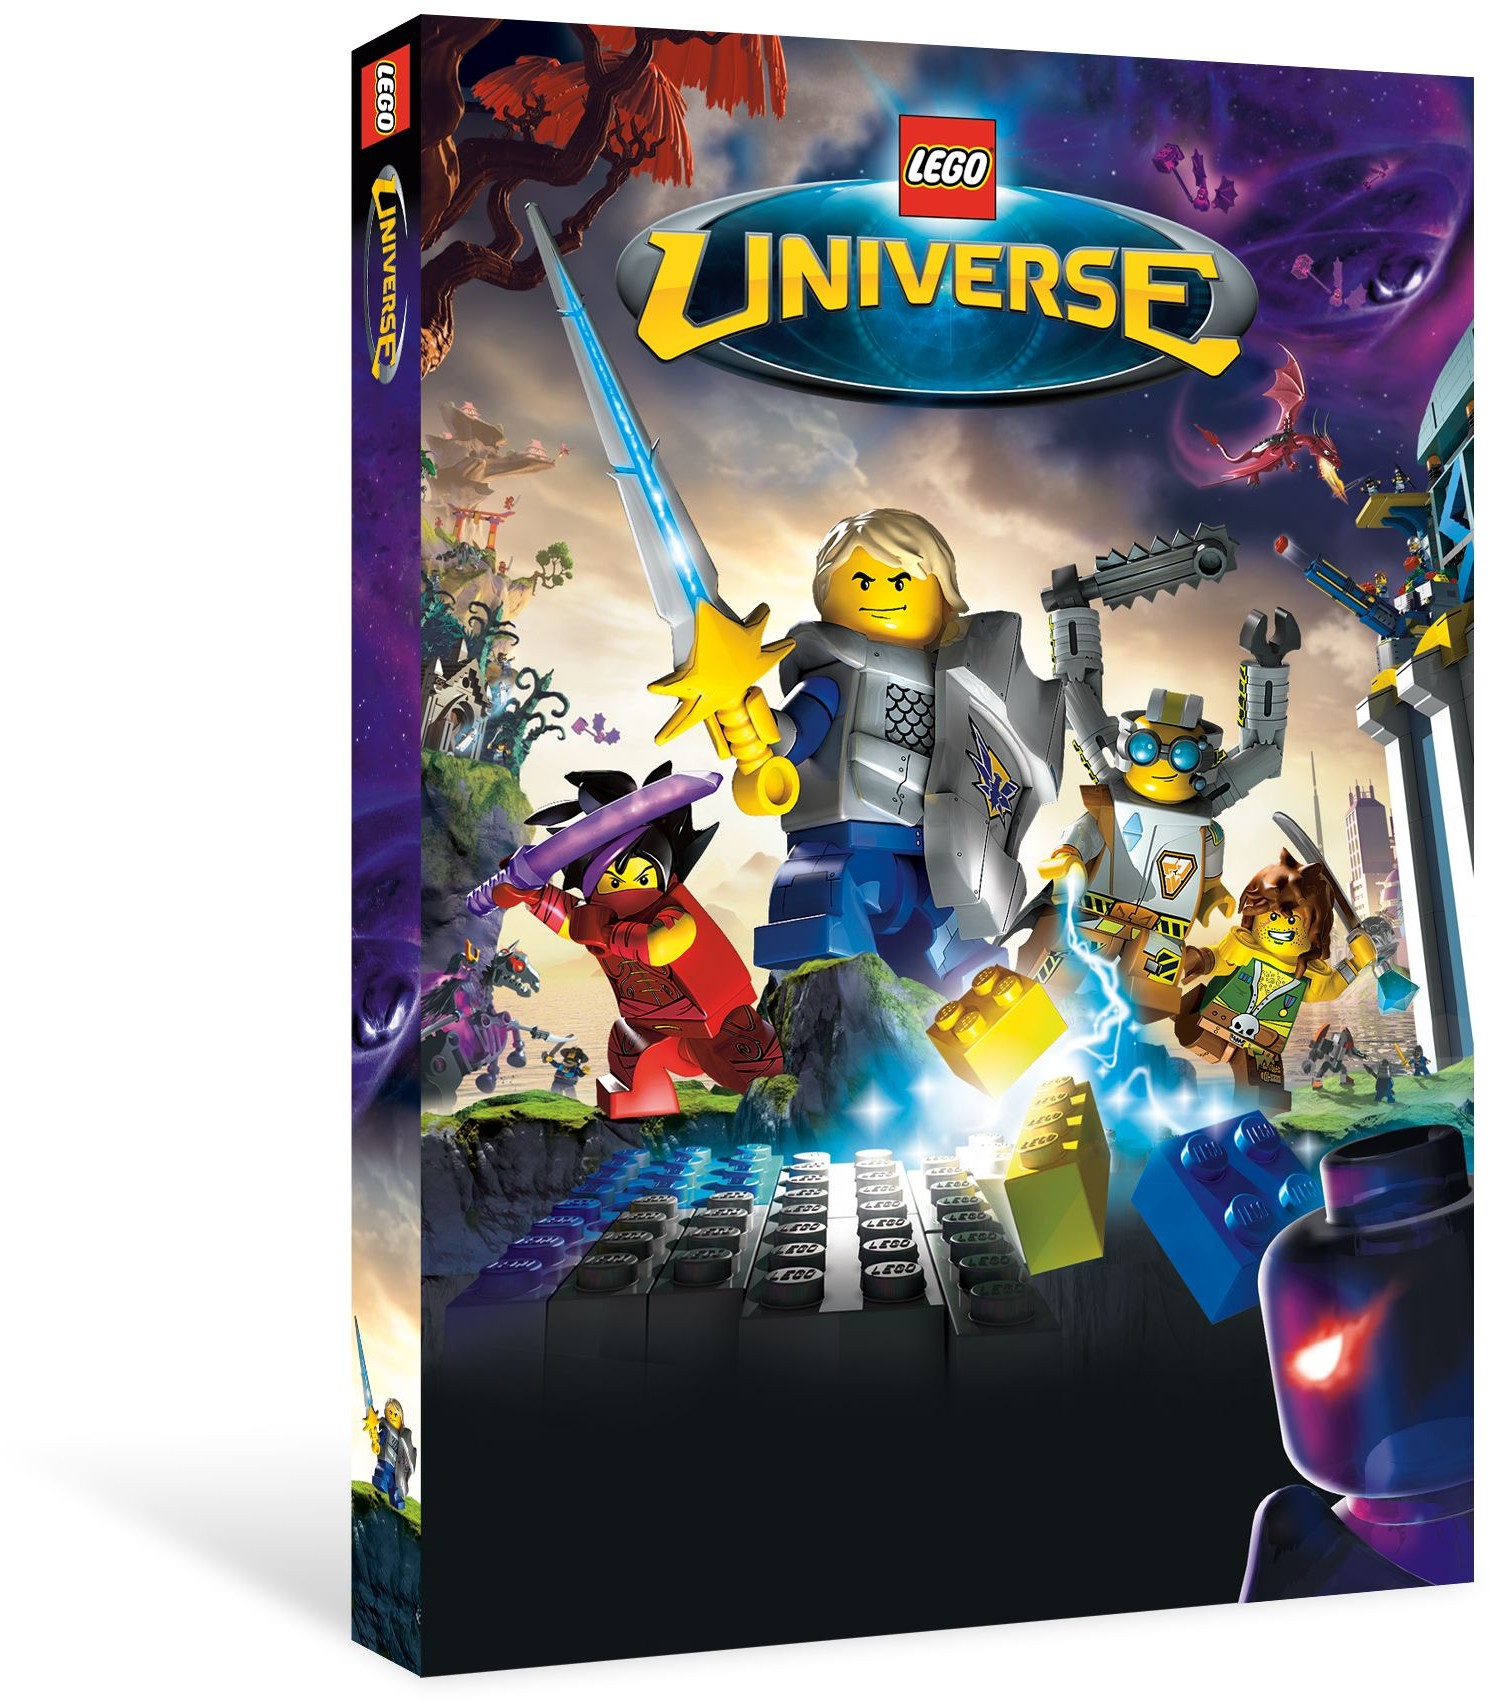 Universe - now free to with a 'Free To Play Zone' | Brickset: LEGO set and database